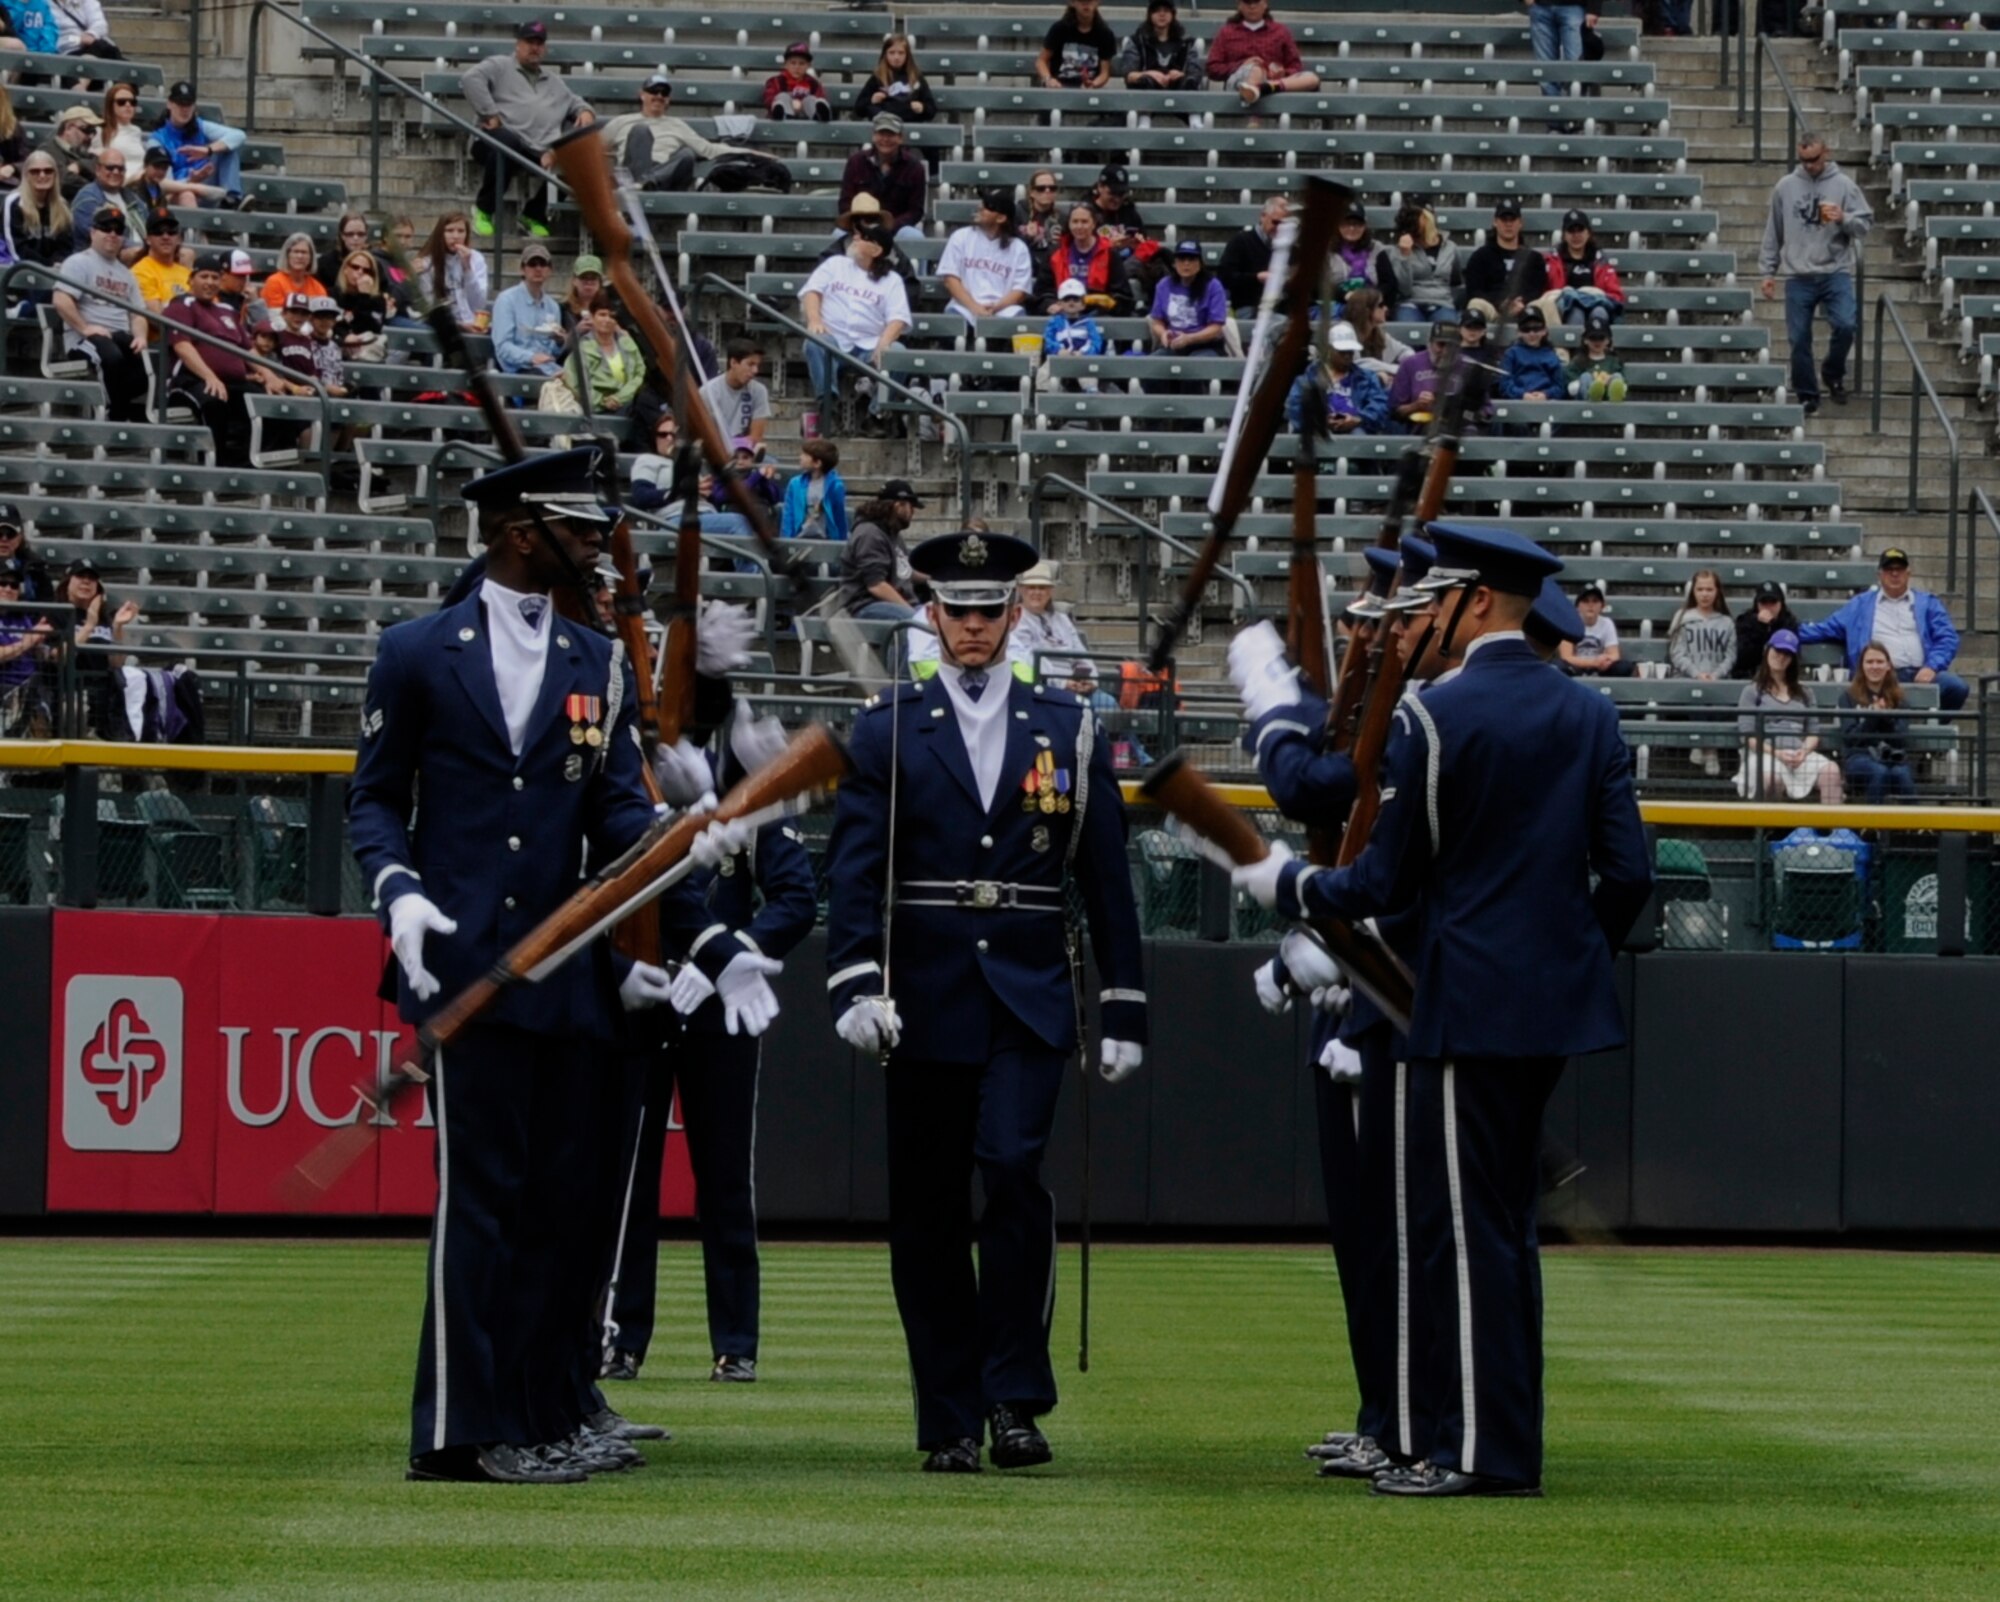 Capt. Cahn Wadhams, U.S. Air Force Honor Guard Ceremonial Flight commander, walks through spinning M-1 Garand rifles during a performance at Coors Field in Denver, Colo., May 24, 2015. The Drill Team promotes the Air Force mission by showcasing drill performances at public and military venues to recruit, retain and inspire Airmen. (U.S. Air Force photo by Senior Airman Preston Webb/RELEASED)